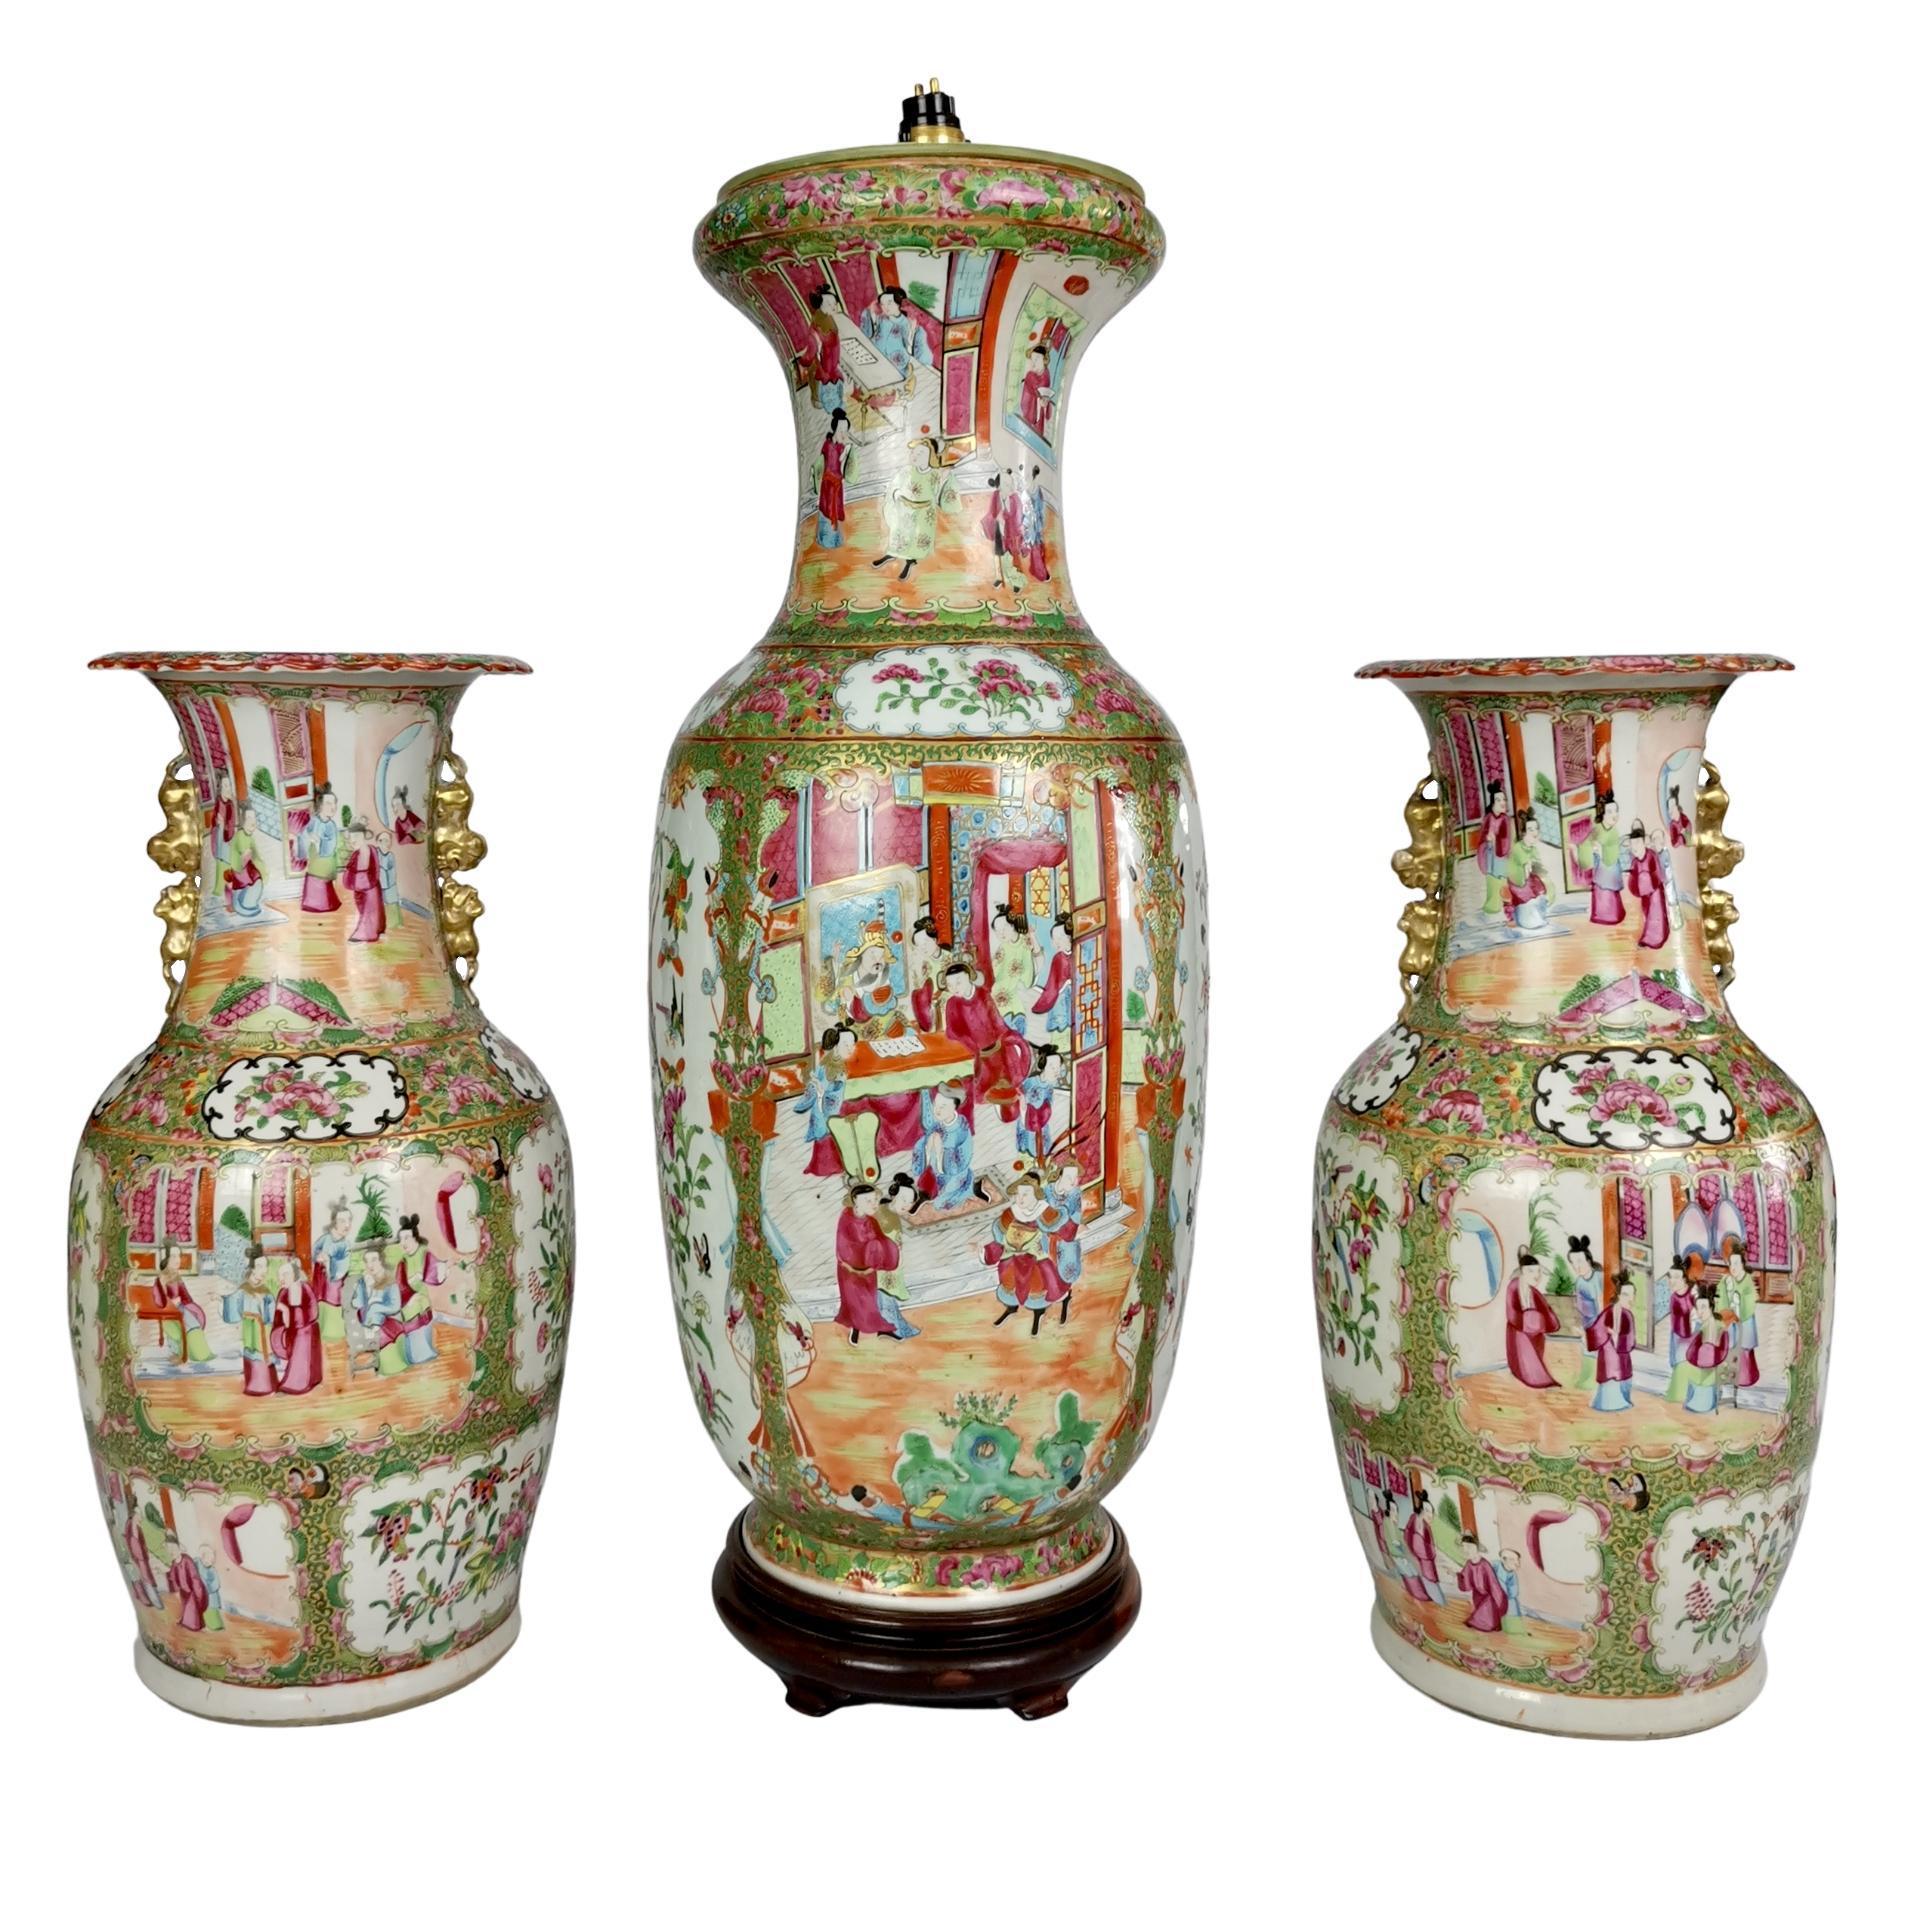 This is a beautiful pair of vases in the 